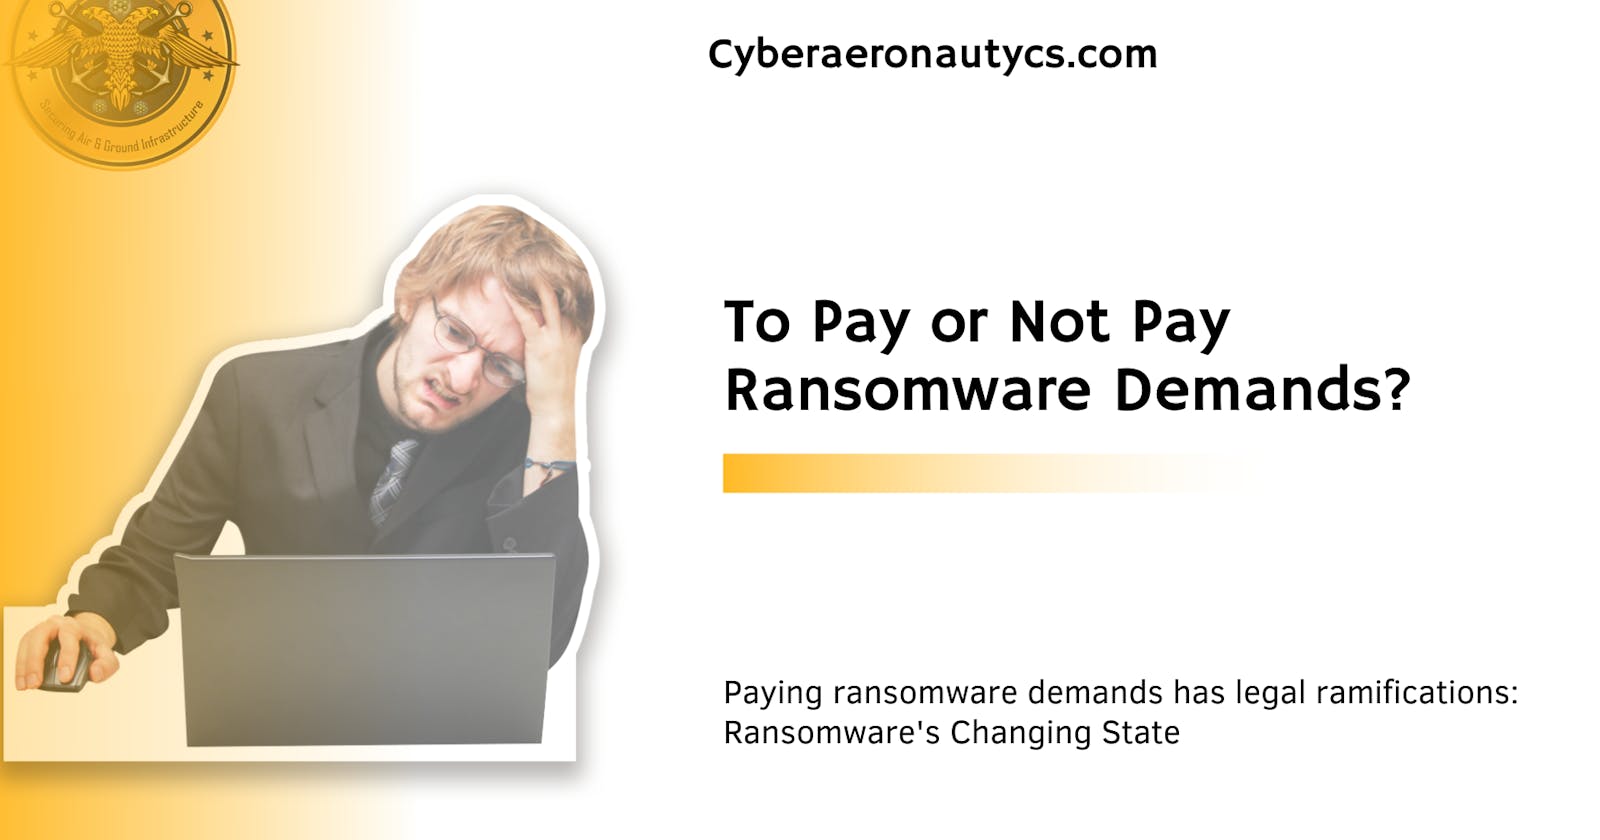 Paying ransomware demands has legal ramifications: Ransomware's Changing State